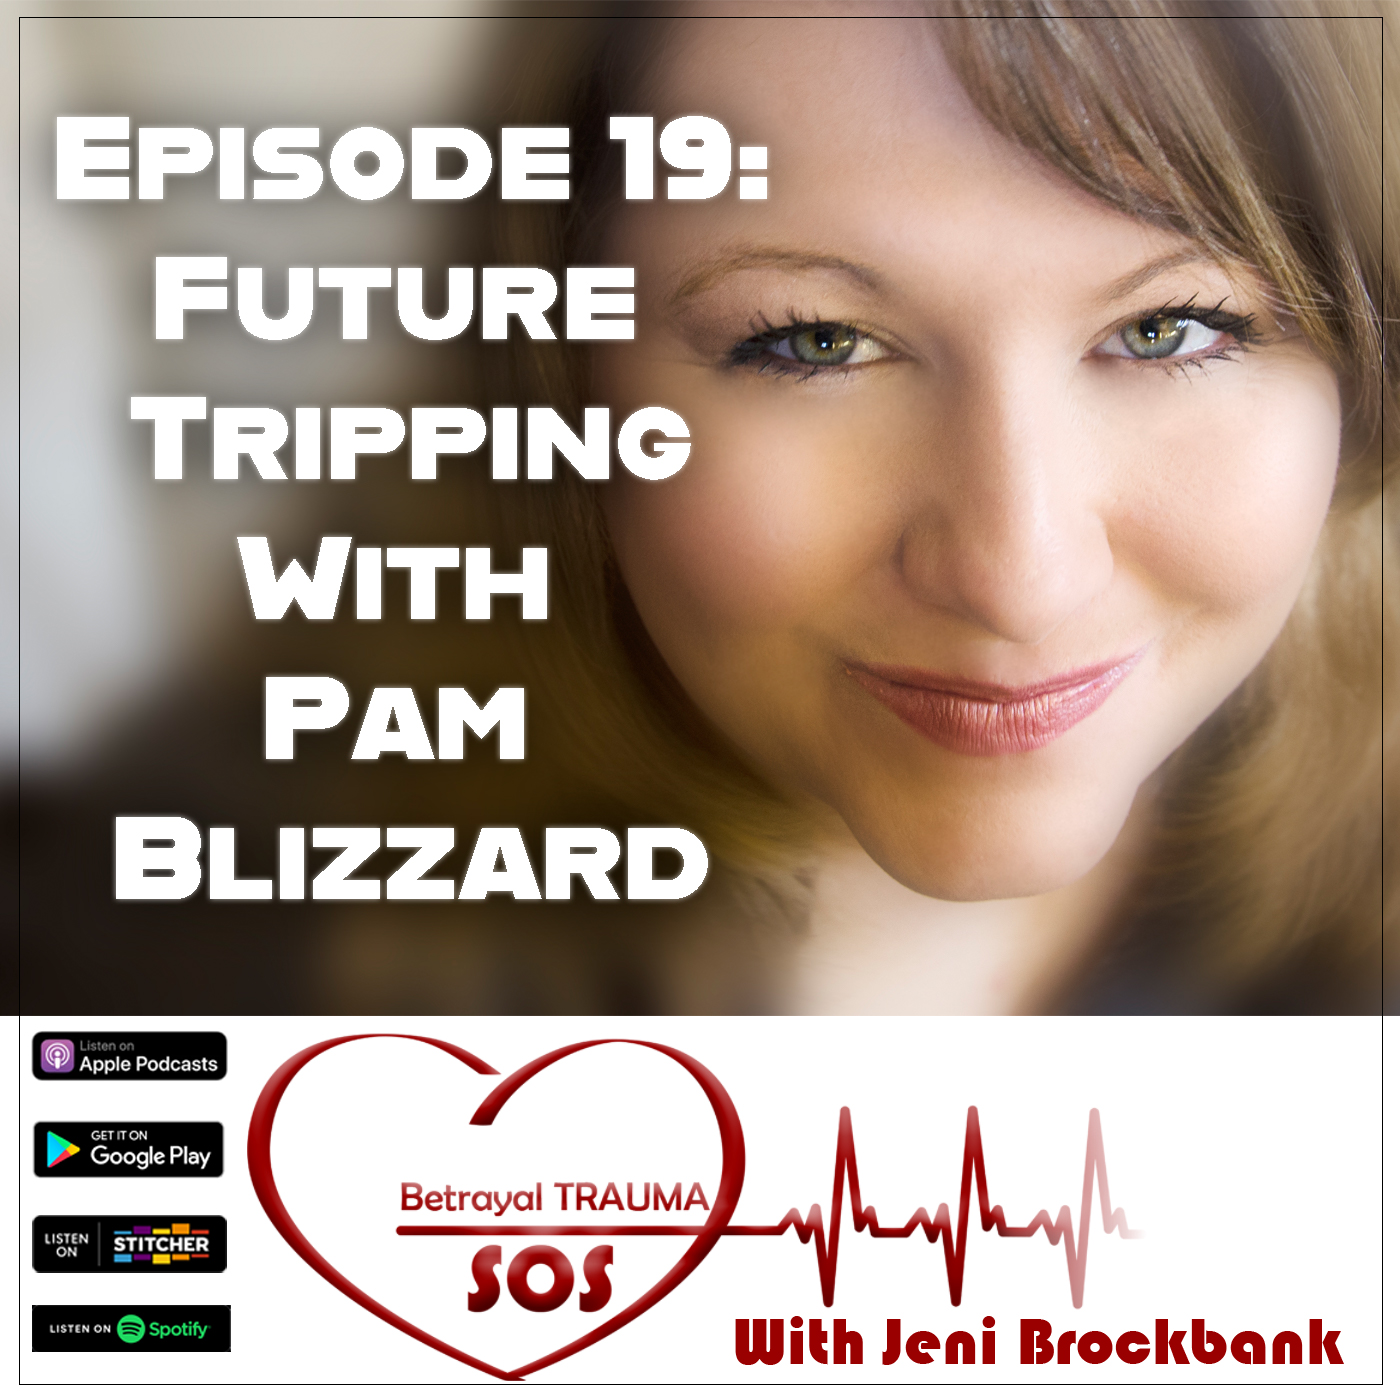 Episode 19: Future Tripping With Pam Blizzard